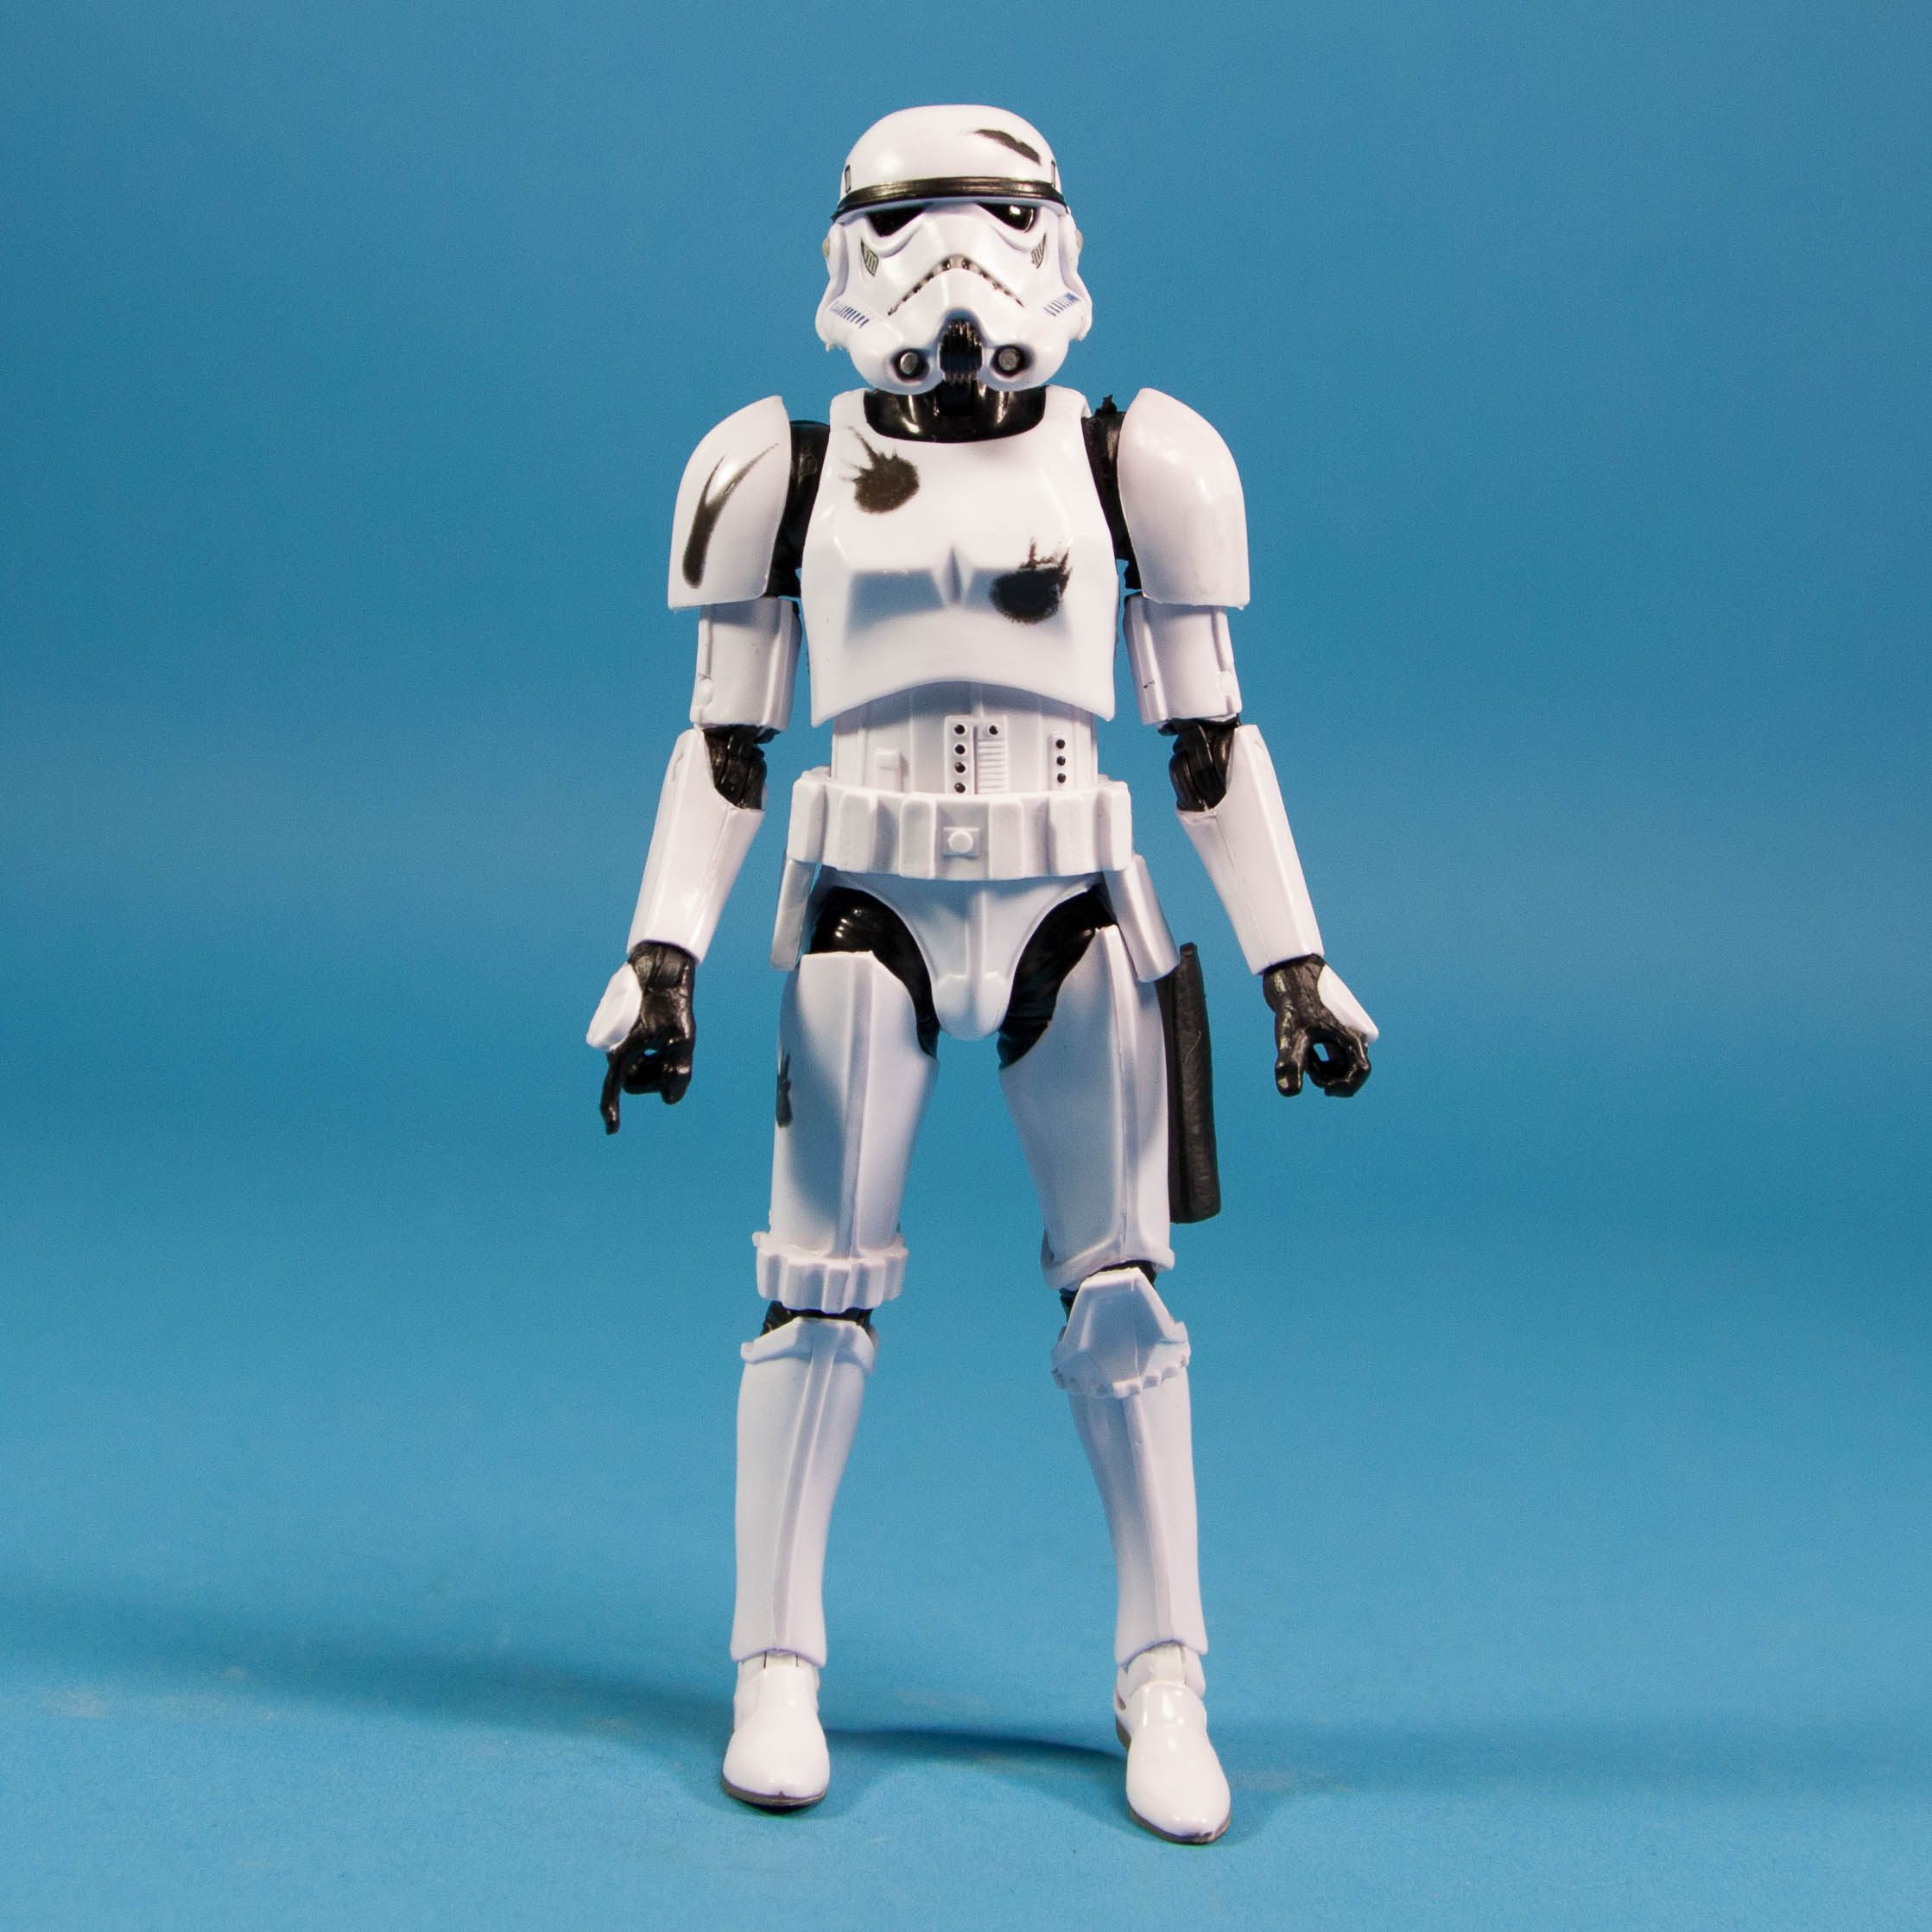 stormtrooper-collection-6-inch-4-pack-amazon-exclusive-023.jpg